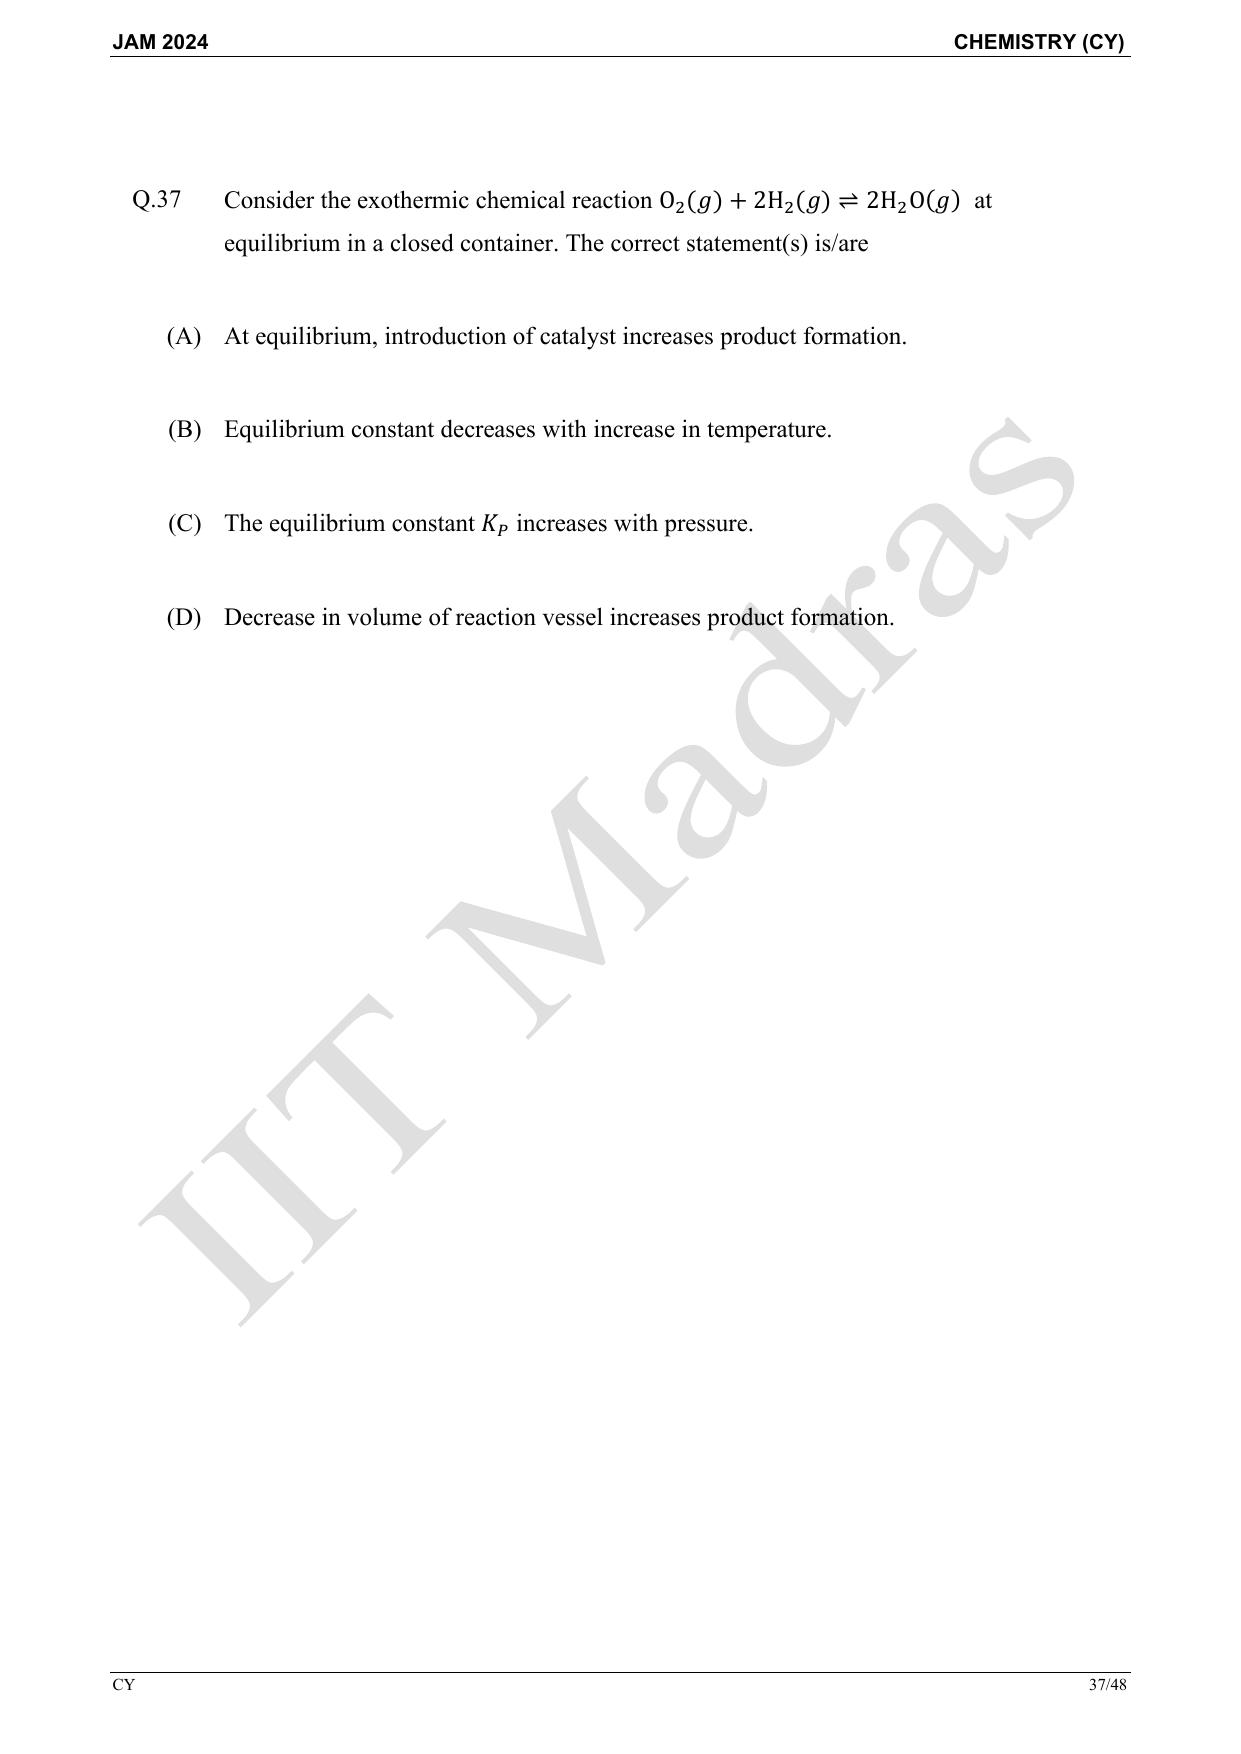 IIT JAM 2024 Chemistry (CY) Master Question Paper - Page 37